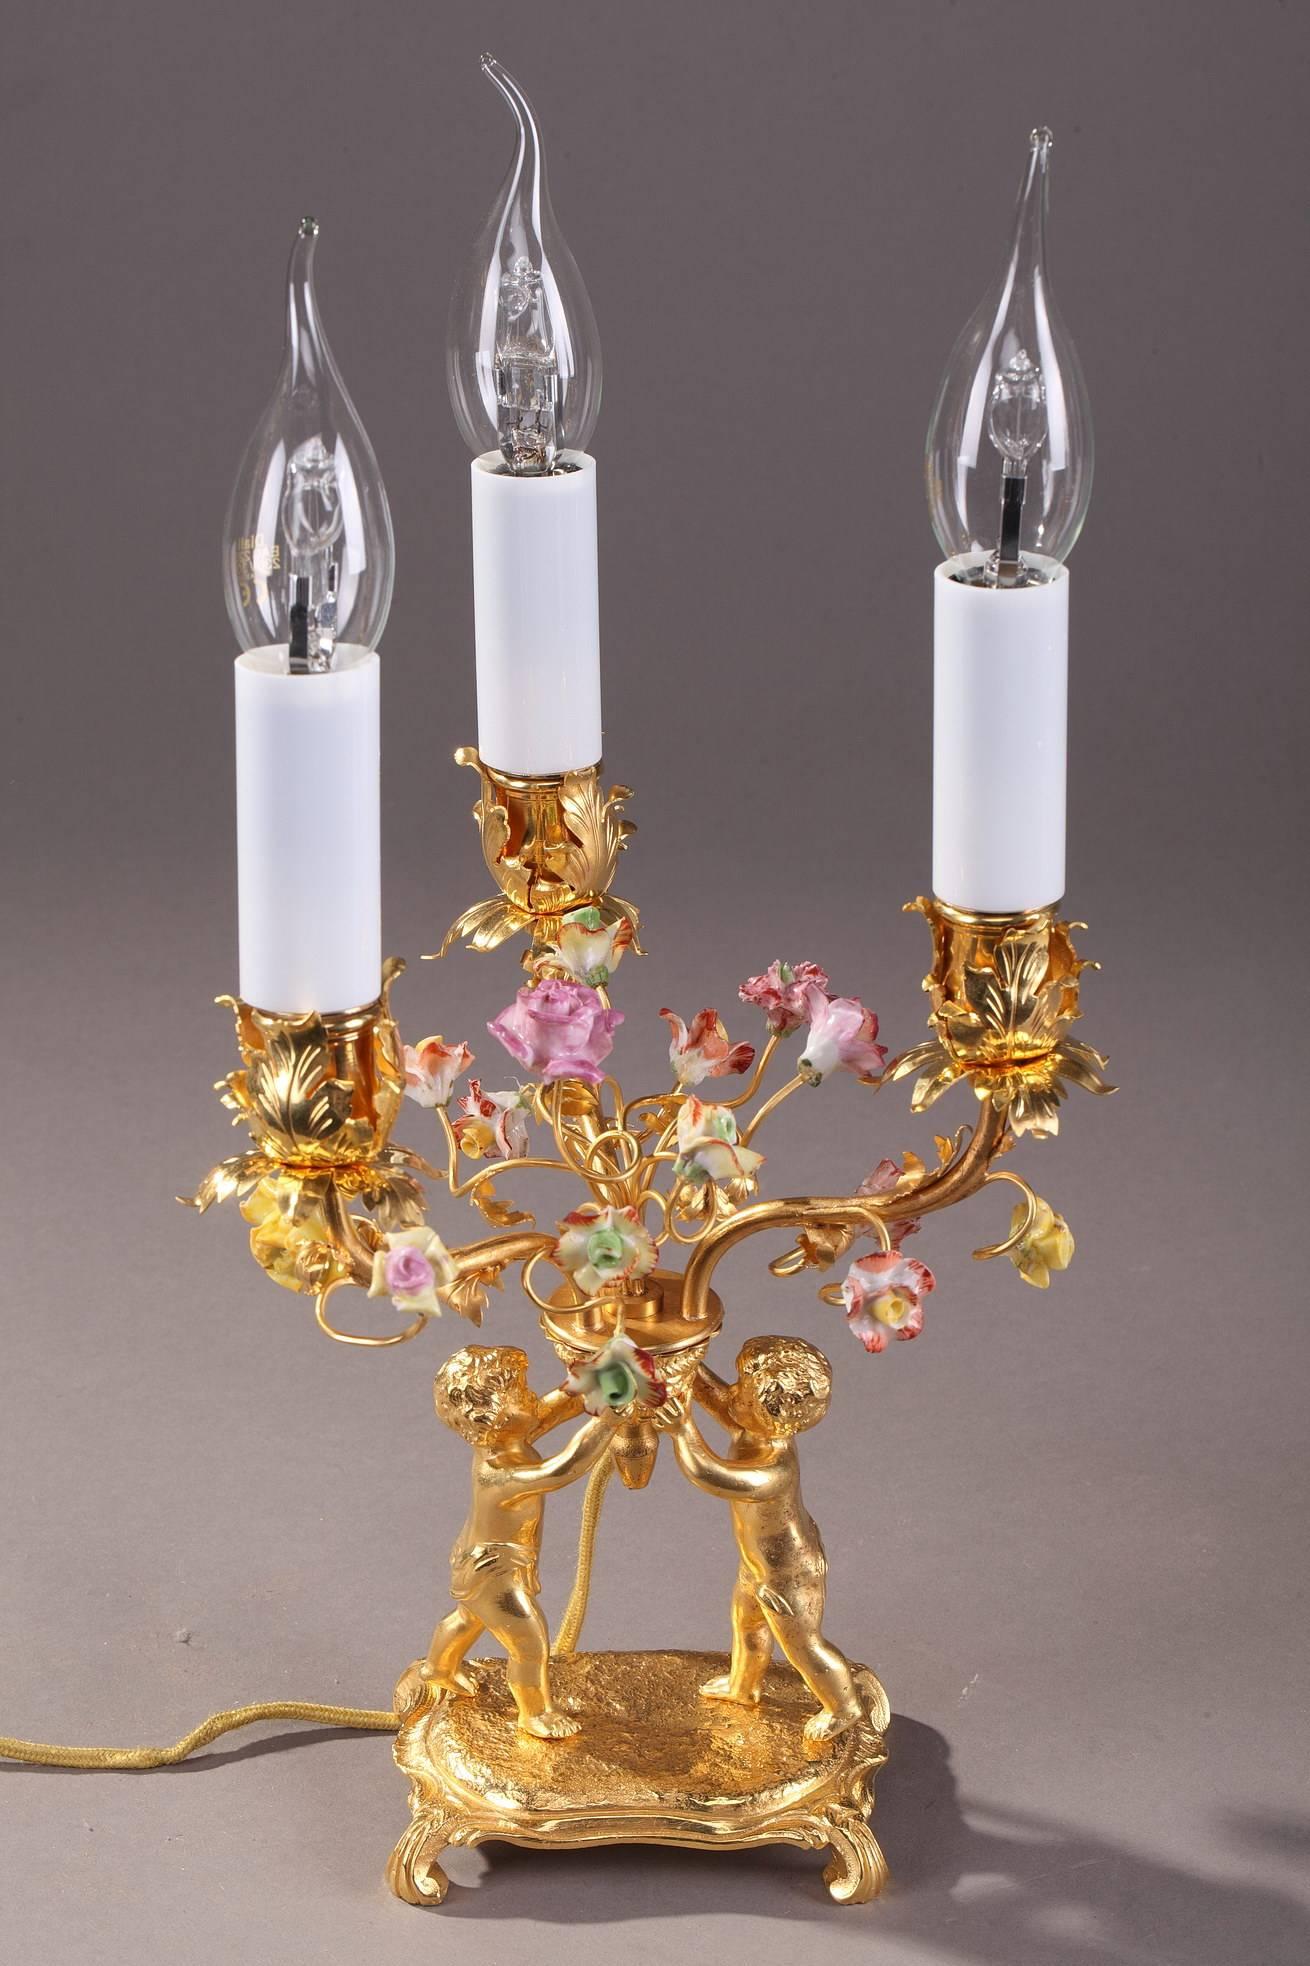 Pair of gilt and chiseled bronze candelabras with three branches each. They are decorated with two putti holding a basket with three candle branches highlighted with porcelain flowers and gilt bronze foliage. Each putto rests on a square, Rocaille